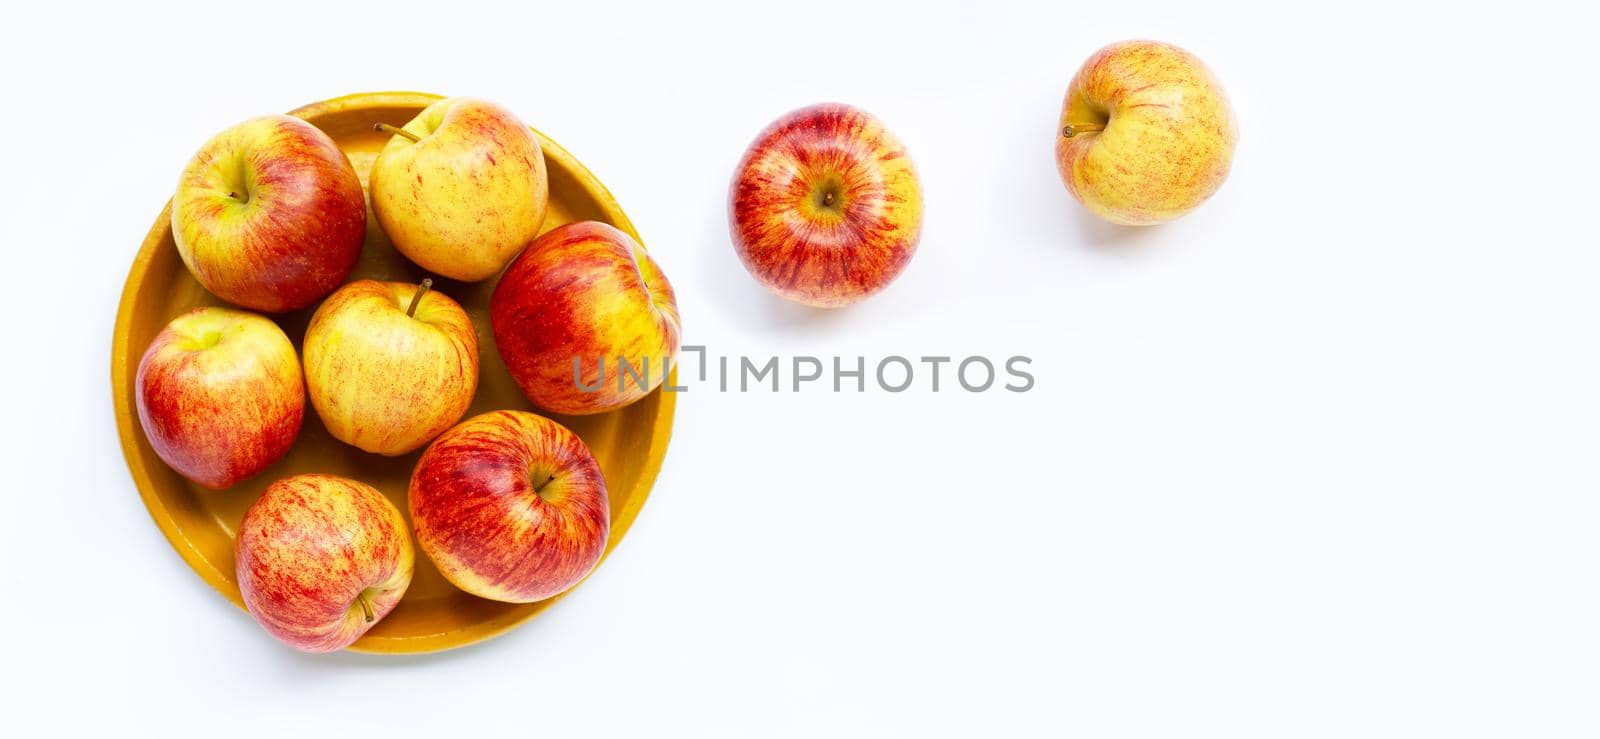 Ripe apples on white background. Top view